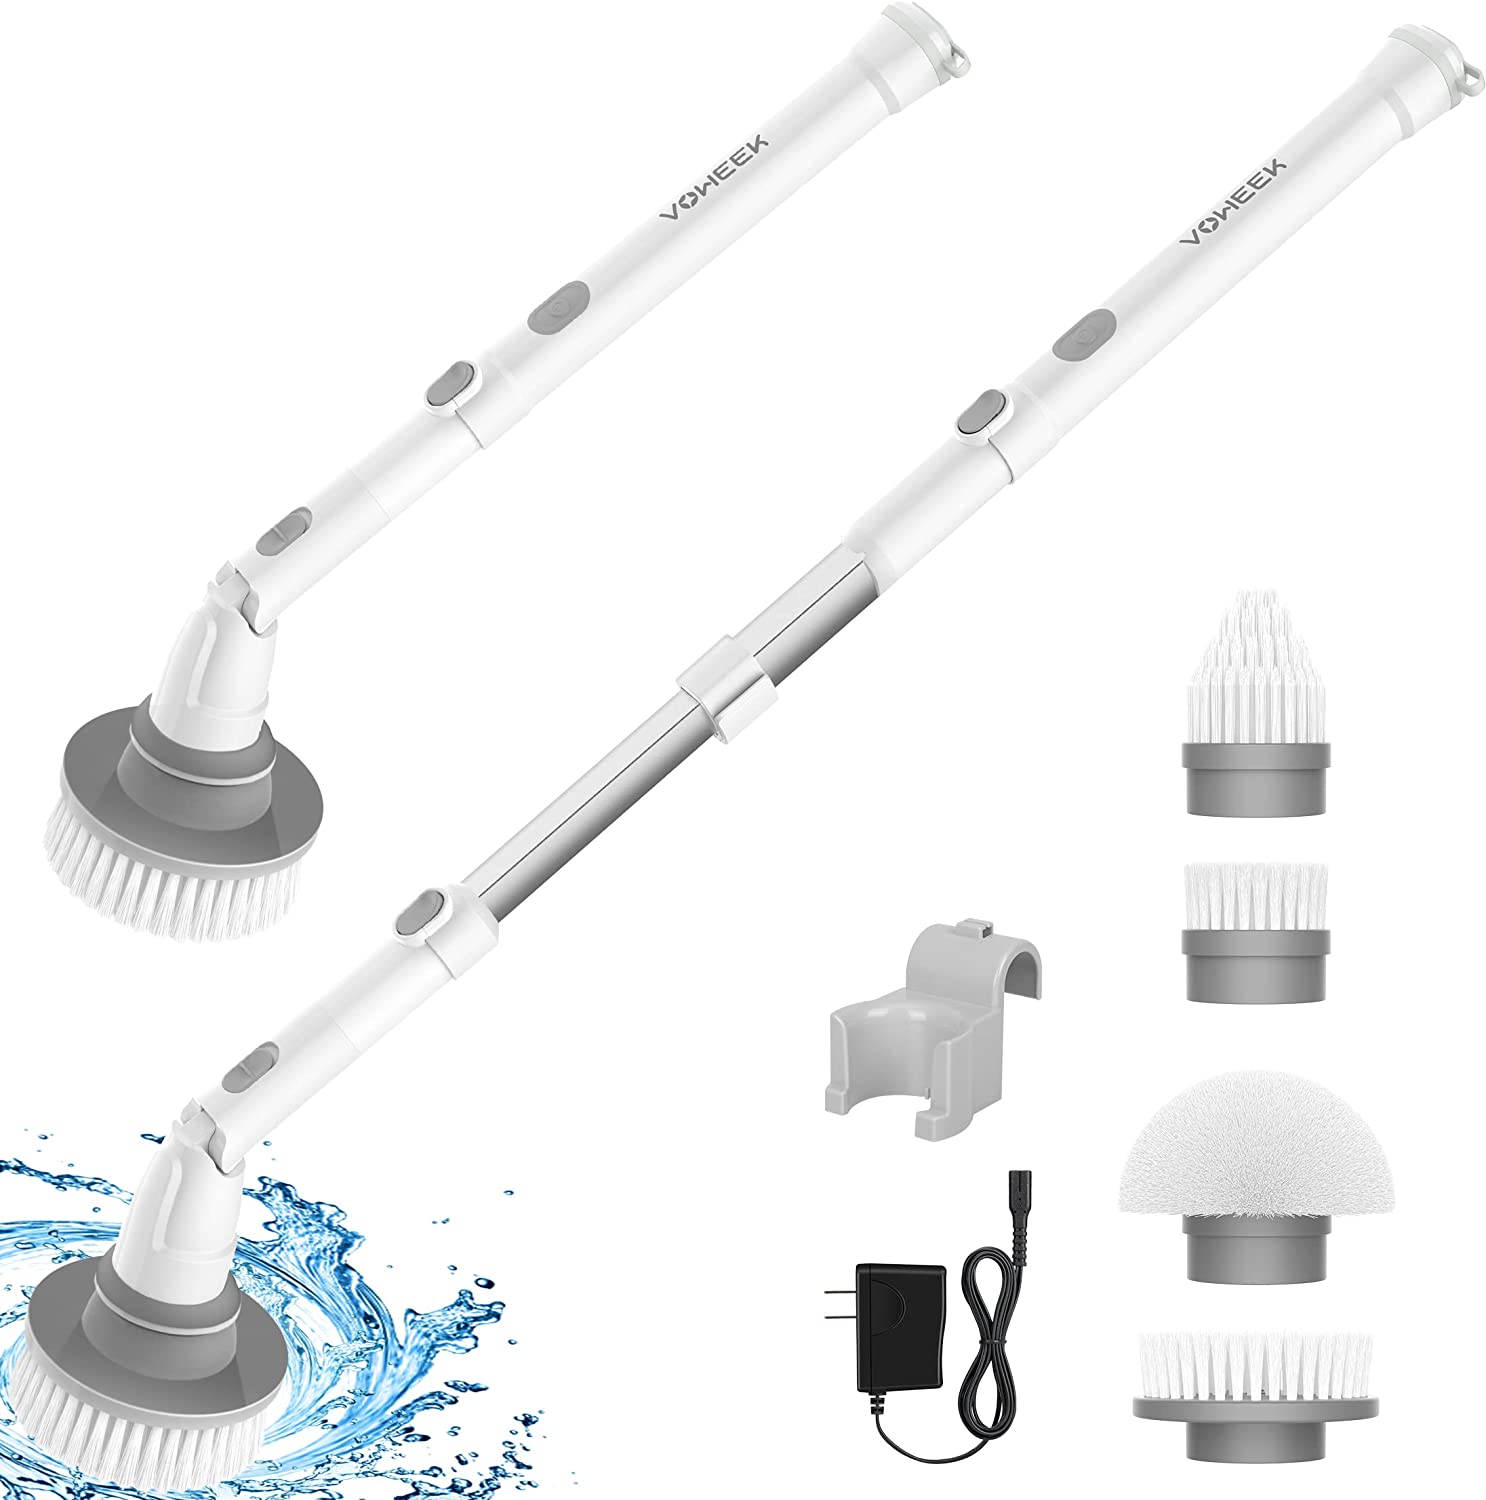 https://discounttoday.net/wp-content/uploads/2022/11/Electric-Spin-Scrubber-Voweek-Cordless-Cleaning-Brush-with-Adjustable-Extension-Arm-4-Replaceable-Cleaning-Heads-Power-Shower-Scrubber-for-Bathroom-Tub-Tile-Floor.jpg